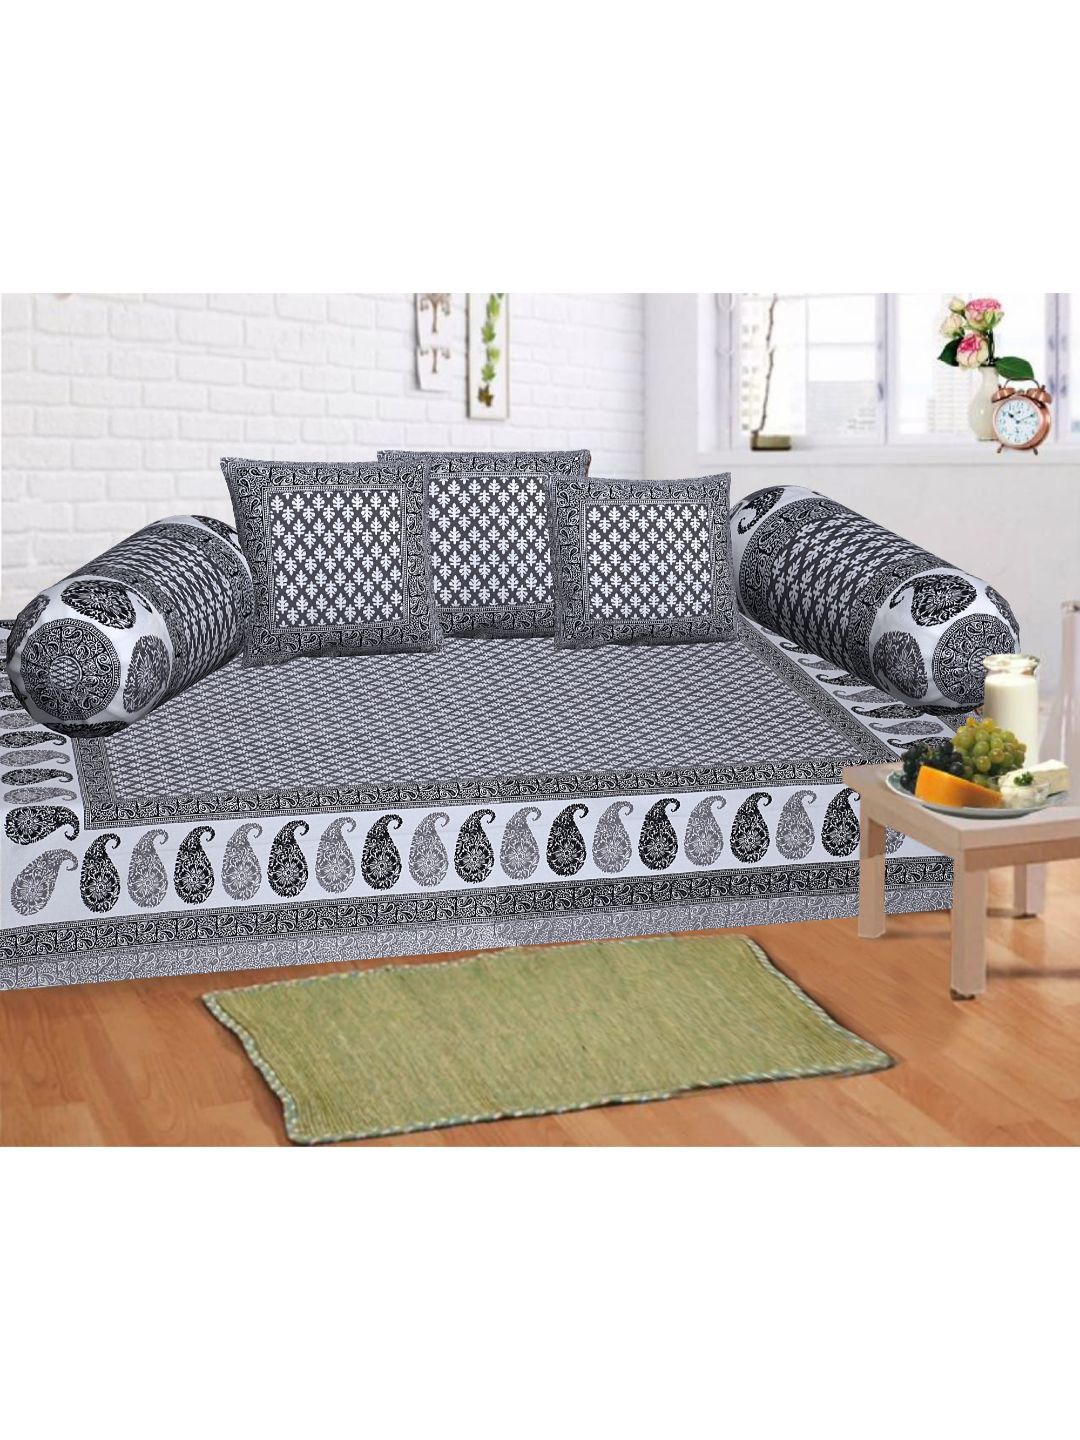 INDHOME LIFE Set Of 6 Black & White Printed Bedsheet With 2 Bolsters & 3 Pure Cotton Cushion Covers Price in India